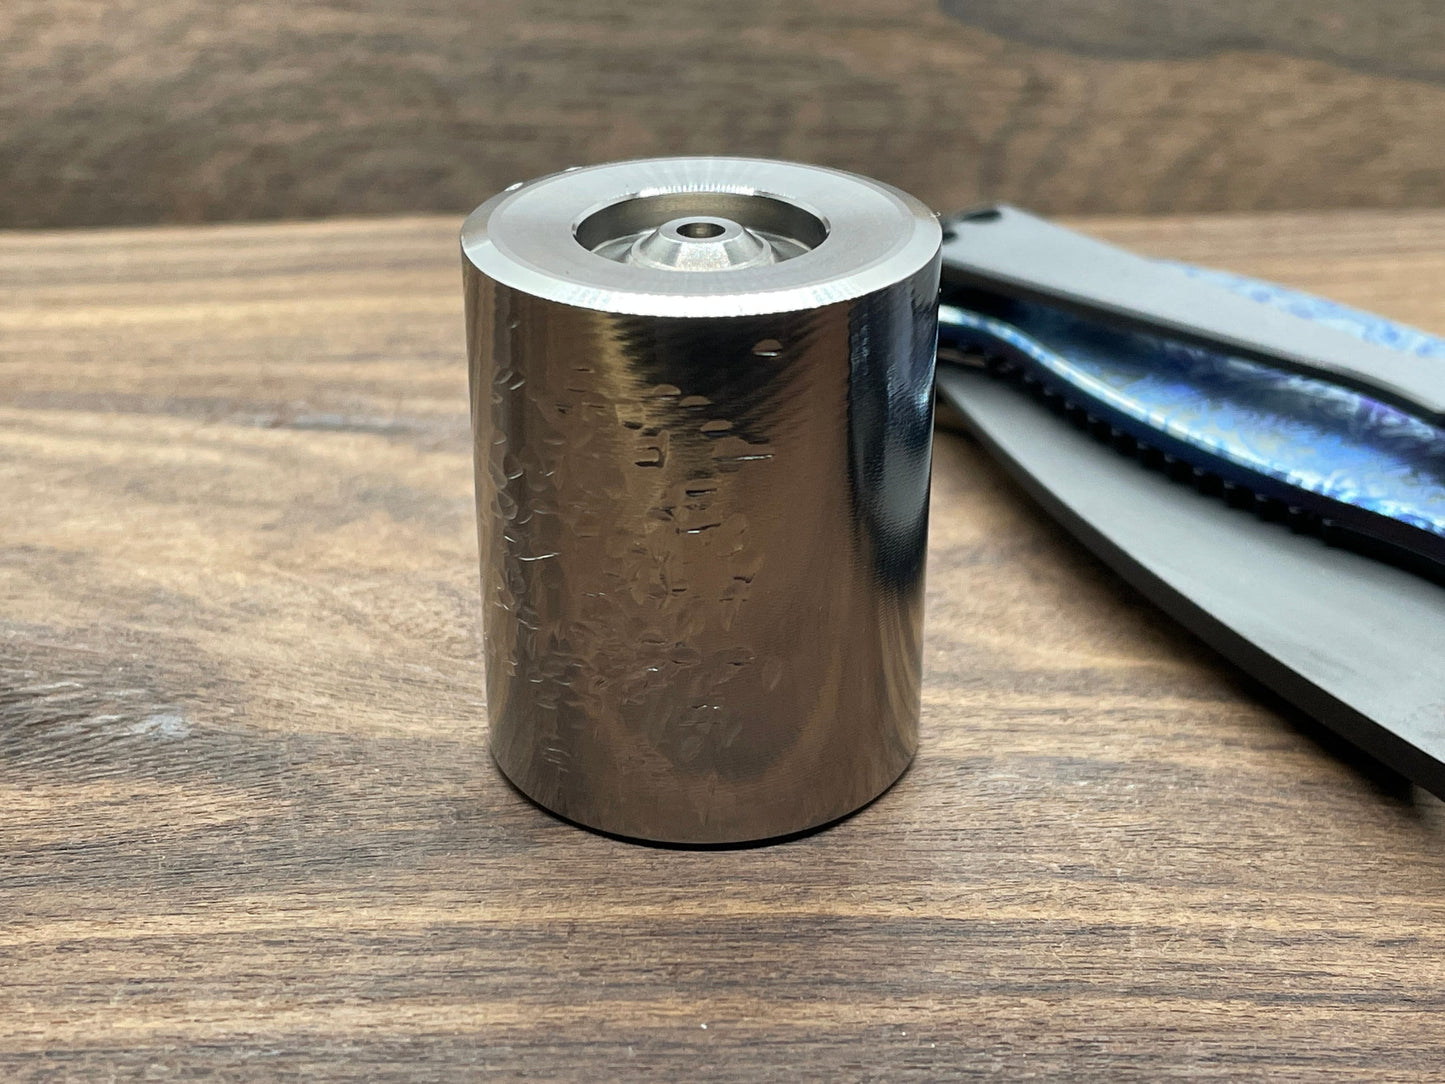 Hammered Titanium Mega Spin station for your EDC Spinning Tops and Spinning Coins Display them in style or use it as Worry Coin MetonBoss